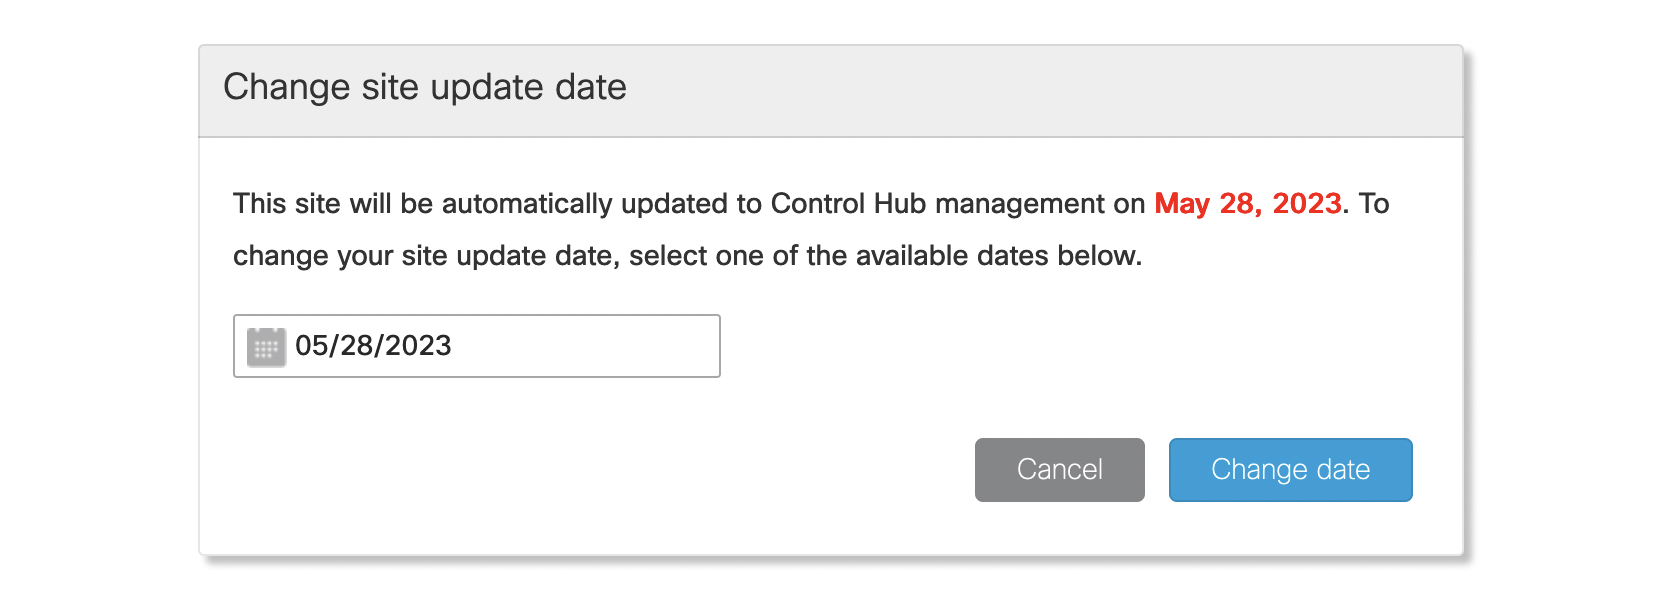 Window to change the date for automatic site update in Site Admin.